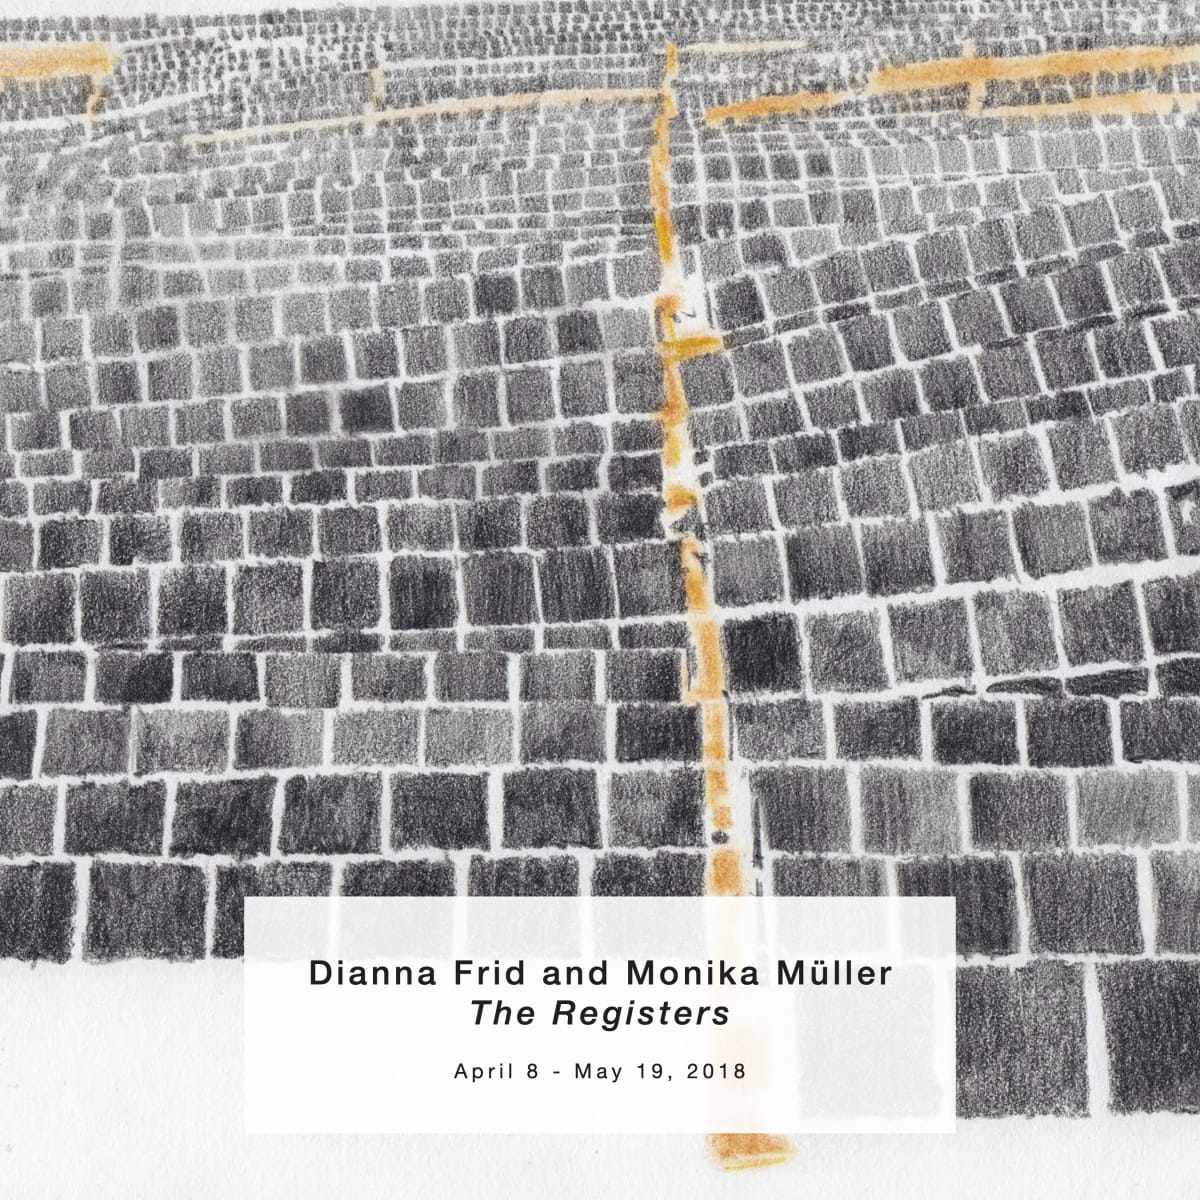 Dianna Frid and Monika Müller: The Registers